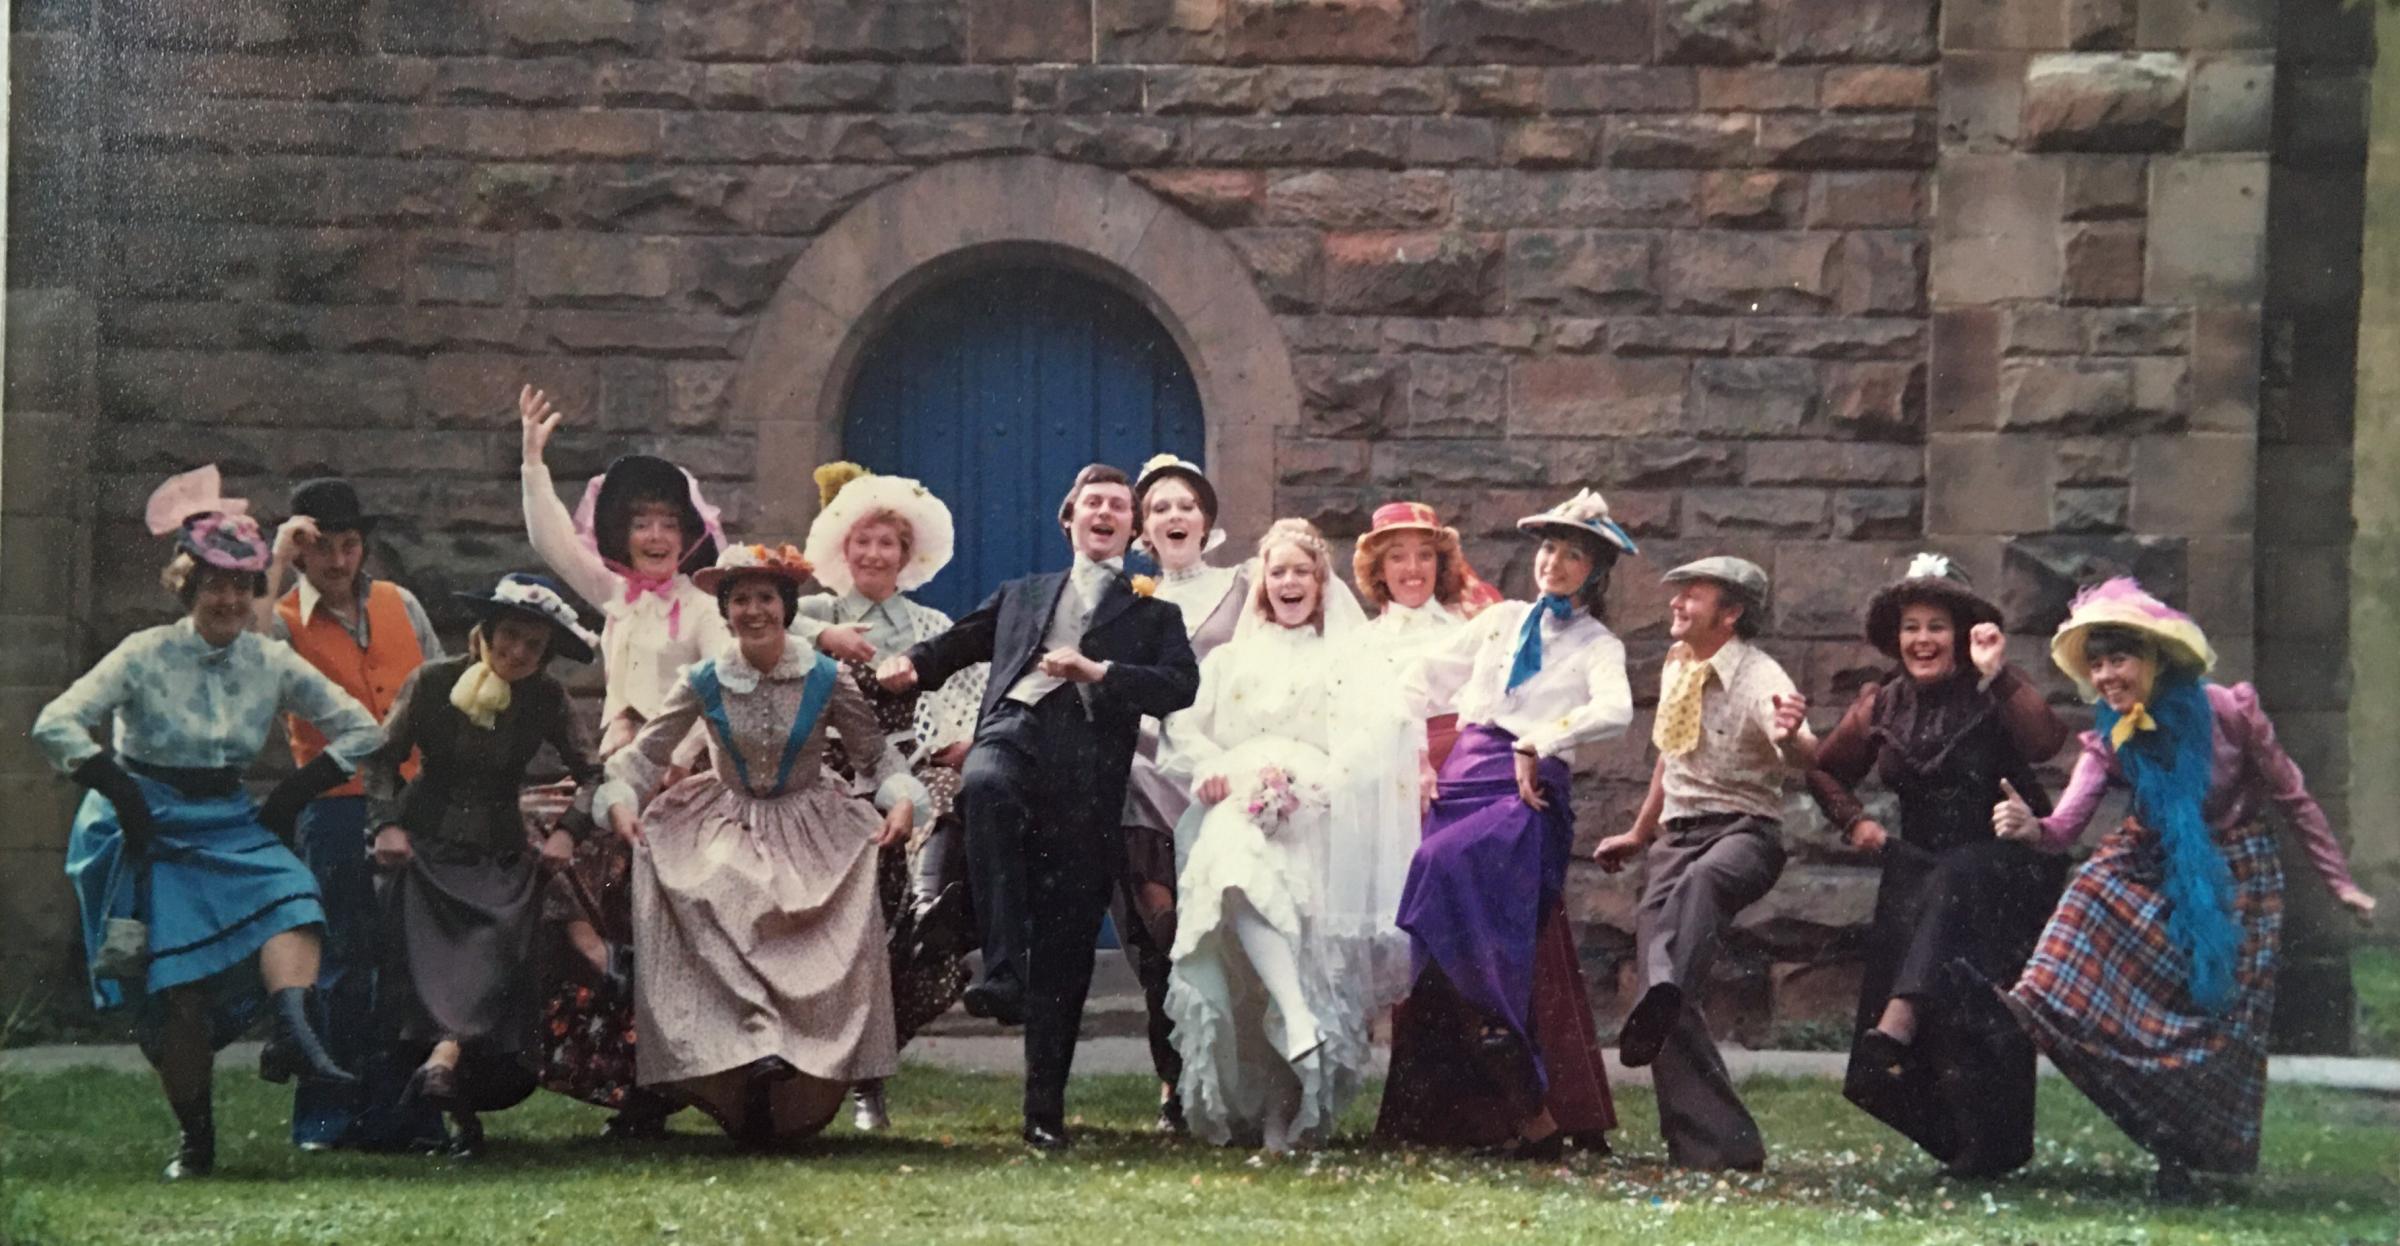 Publicity photo for the Half A Sixpence production in 1977